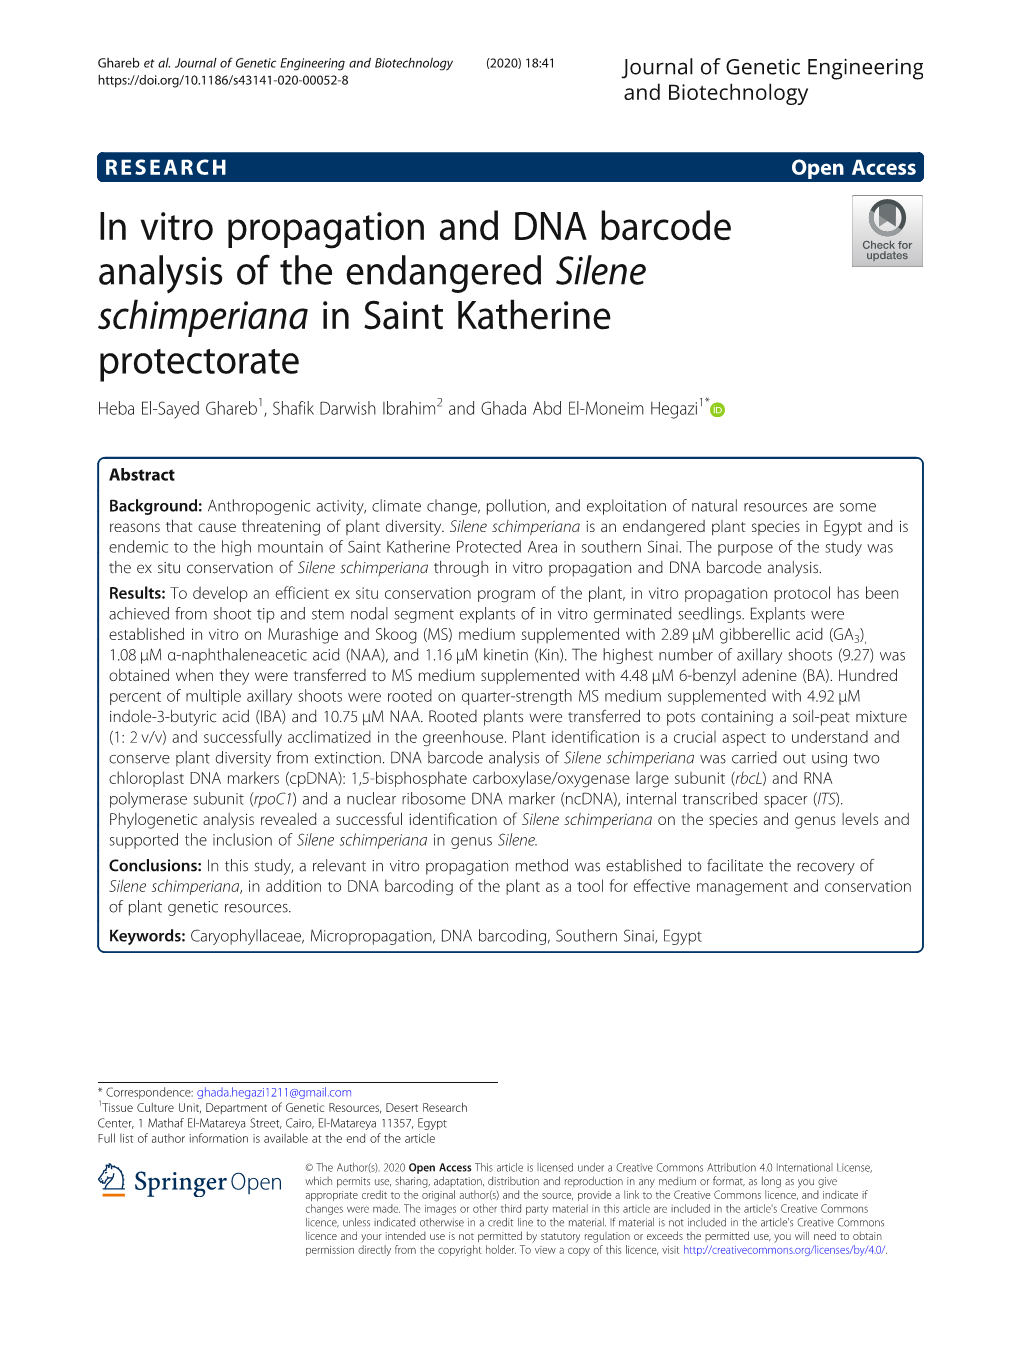 In Vitro Propagation and DNA Barcode Analysis of the Endangered Silene Schimperiana in Saint Katherine Protectorate